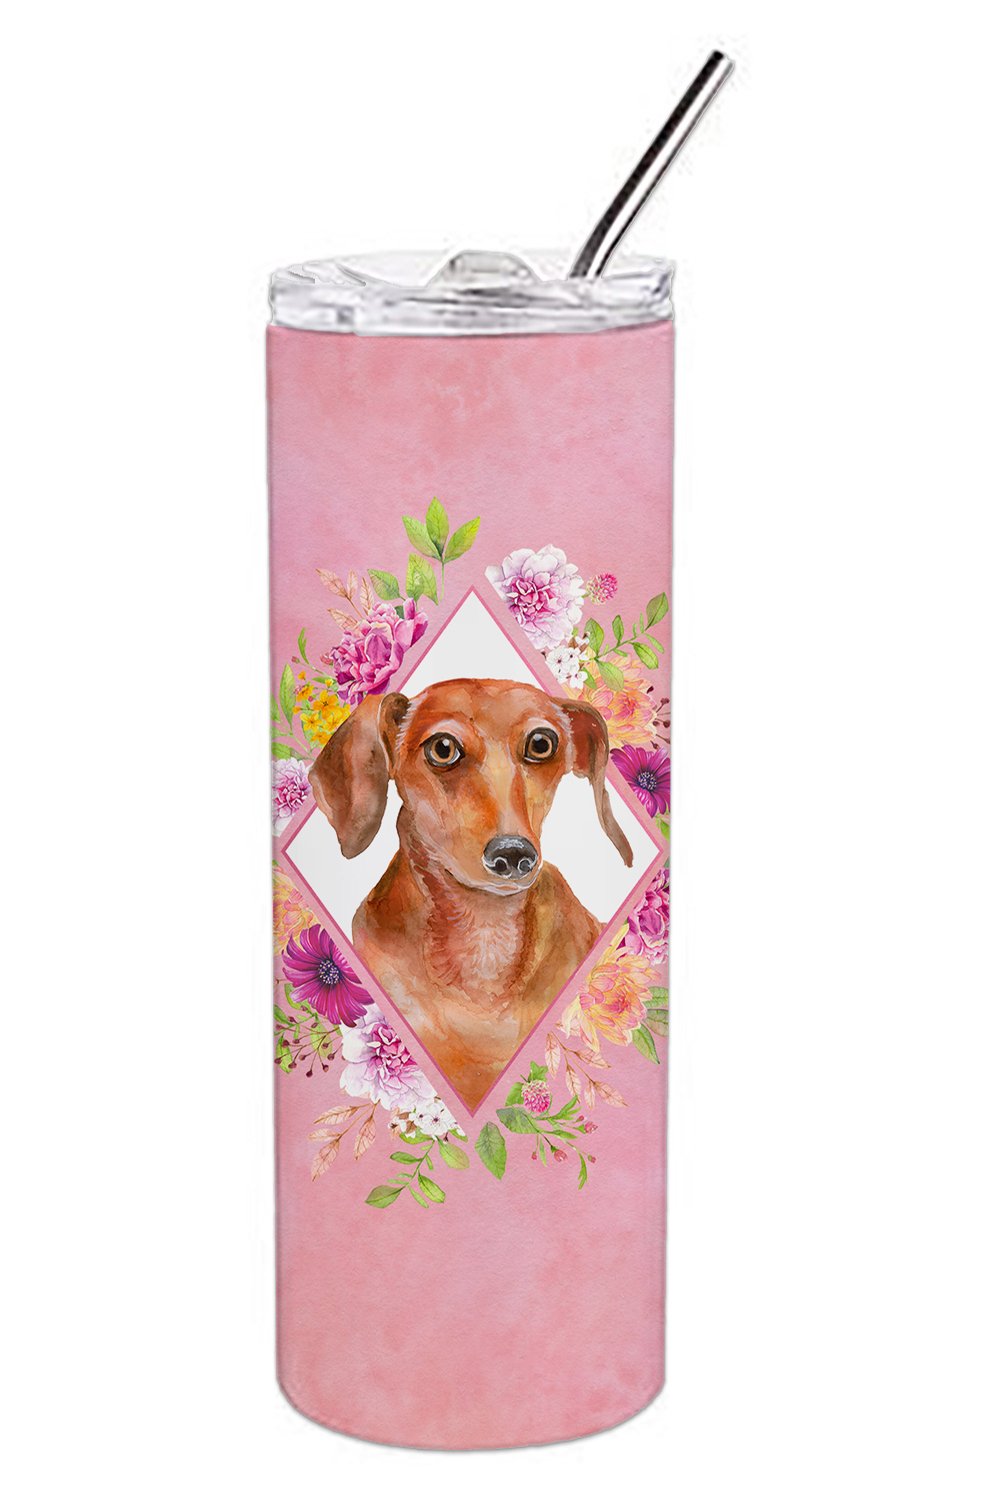 Dachshund Red #2 Pink Flowers Double Walled Stainless Steel 20 oz Skinny Tumbler CK4135TBL20 by Caroline's Treasures